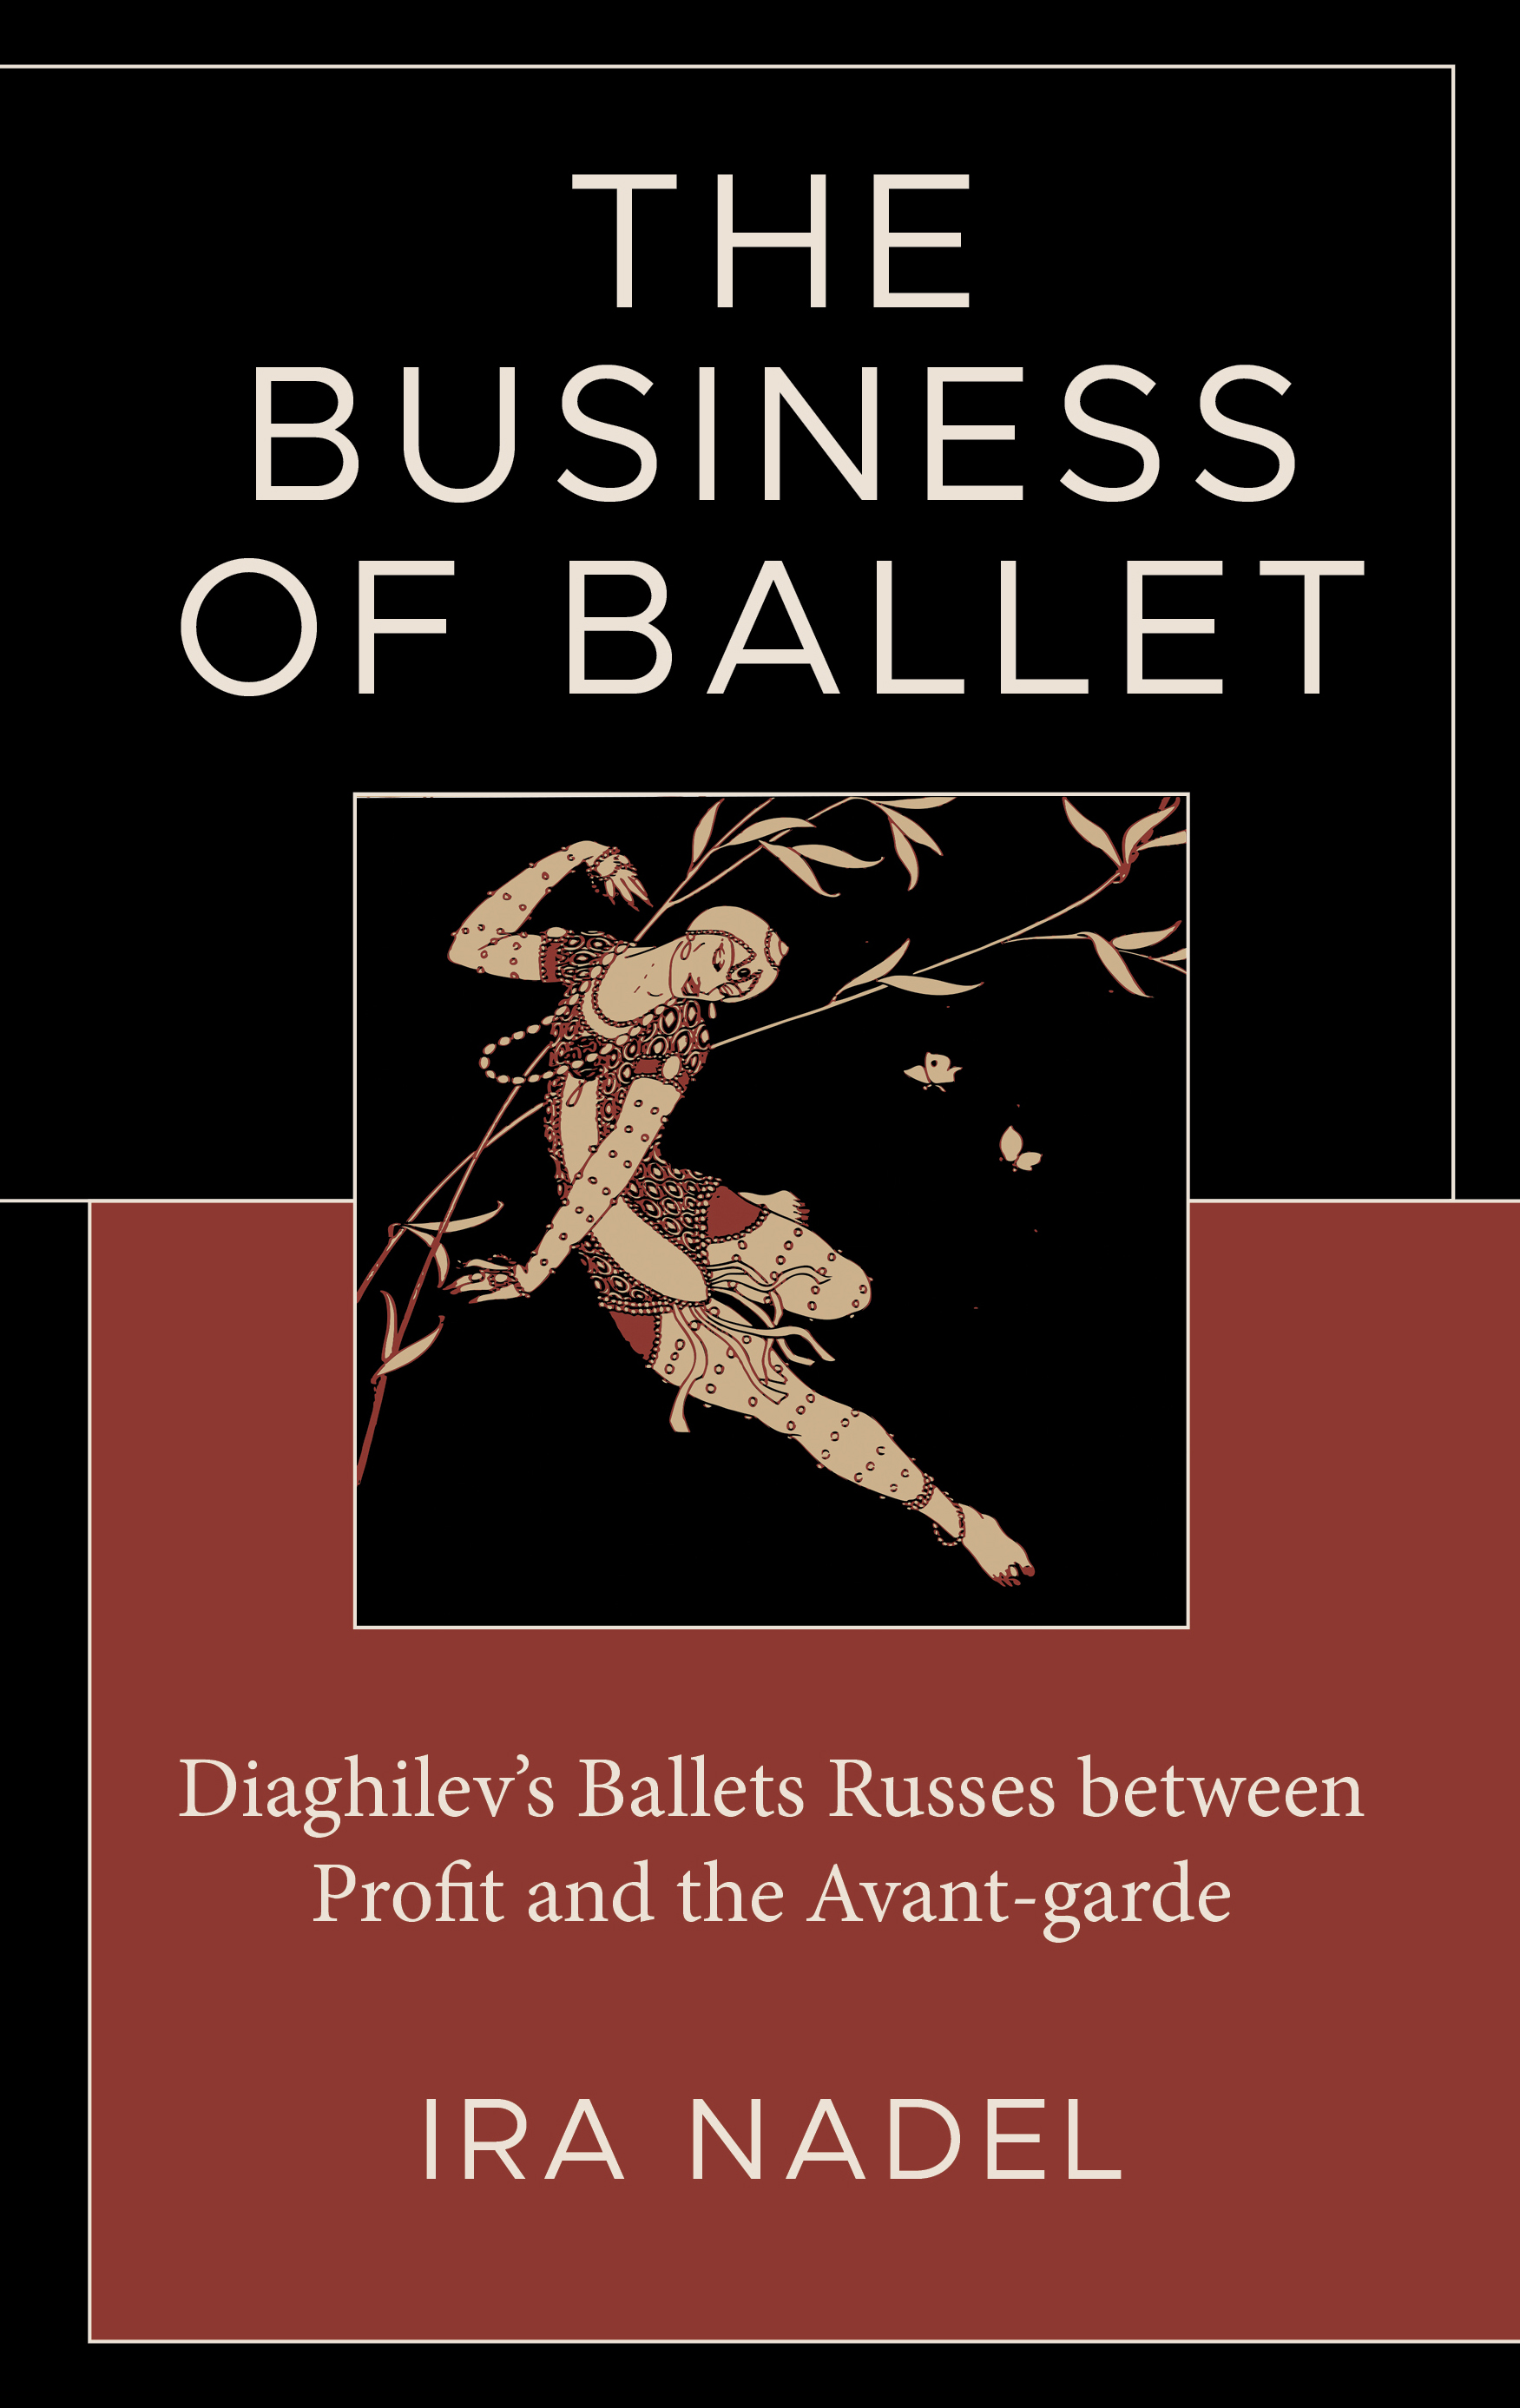 The Business of Ballet: Diaghilev’s Ballets Russes between Profit and the Avant-garde